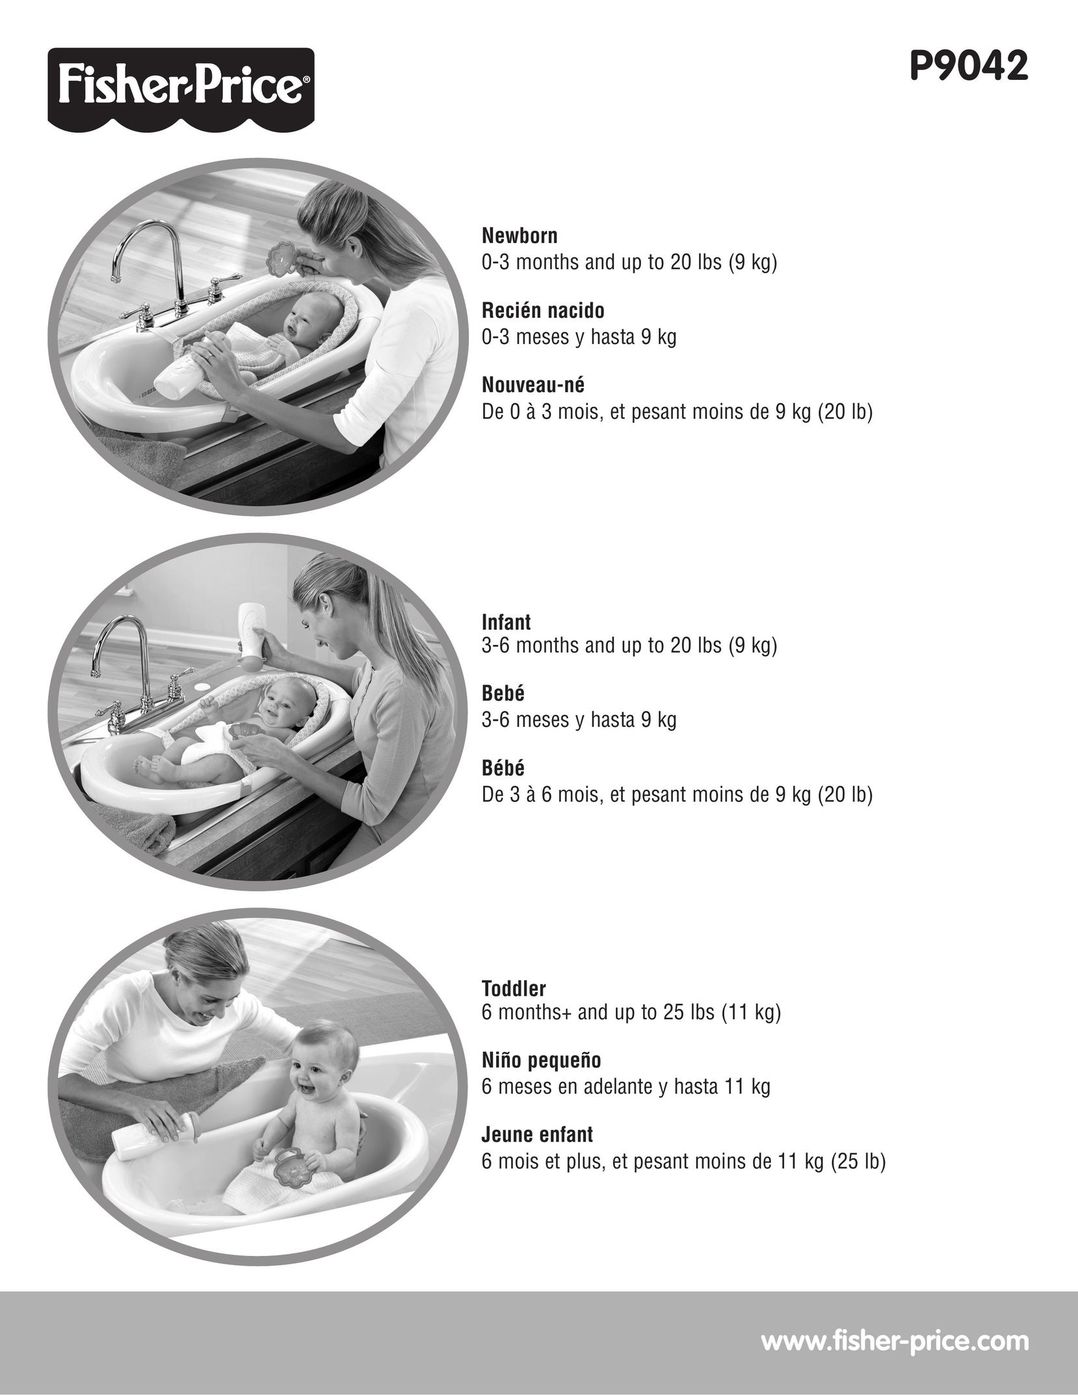 Fisher-Price P9042 Baby Accessories User Manual (Page 1)